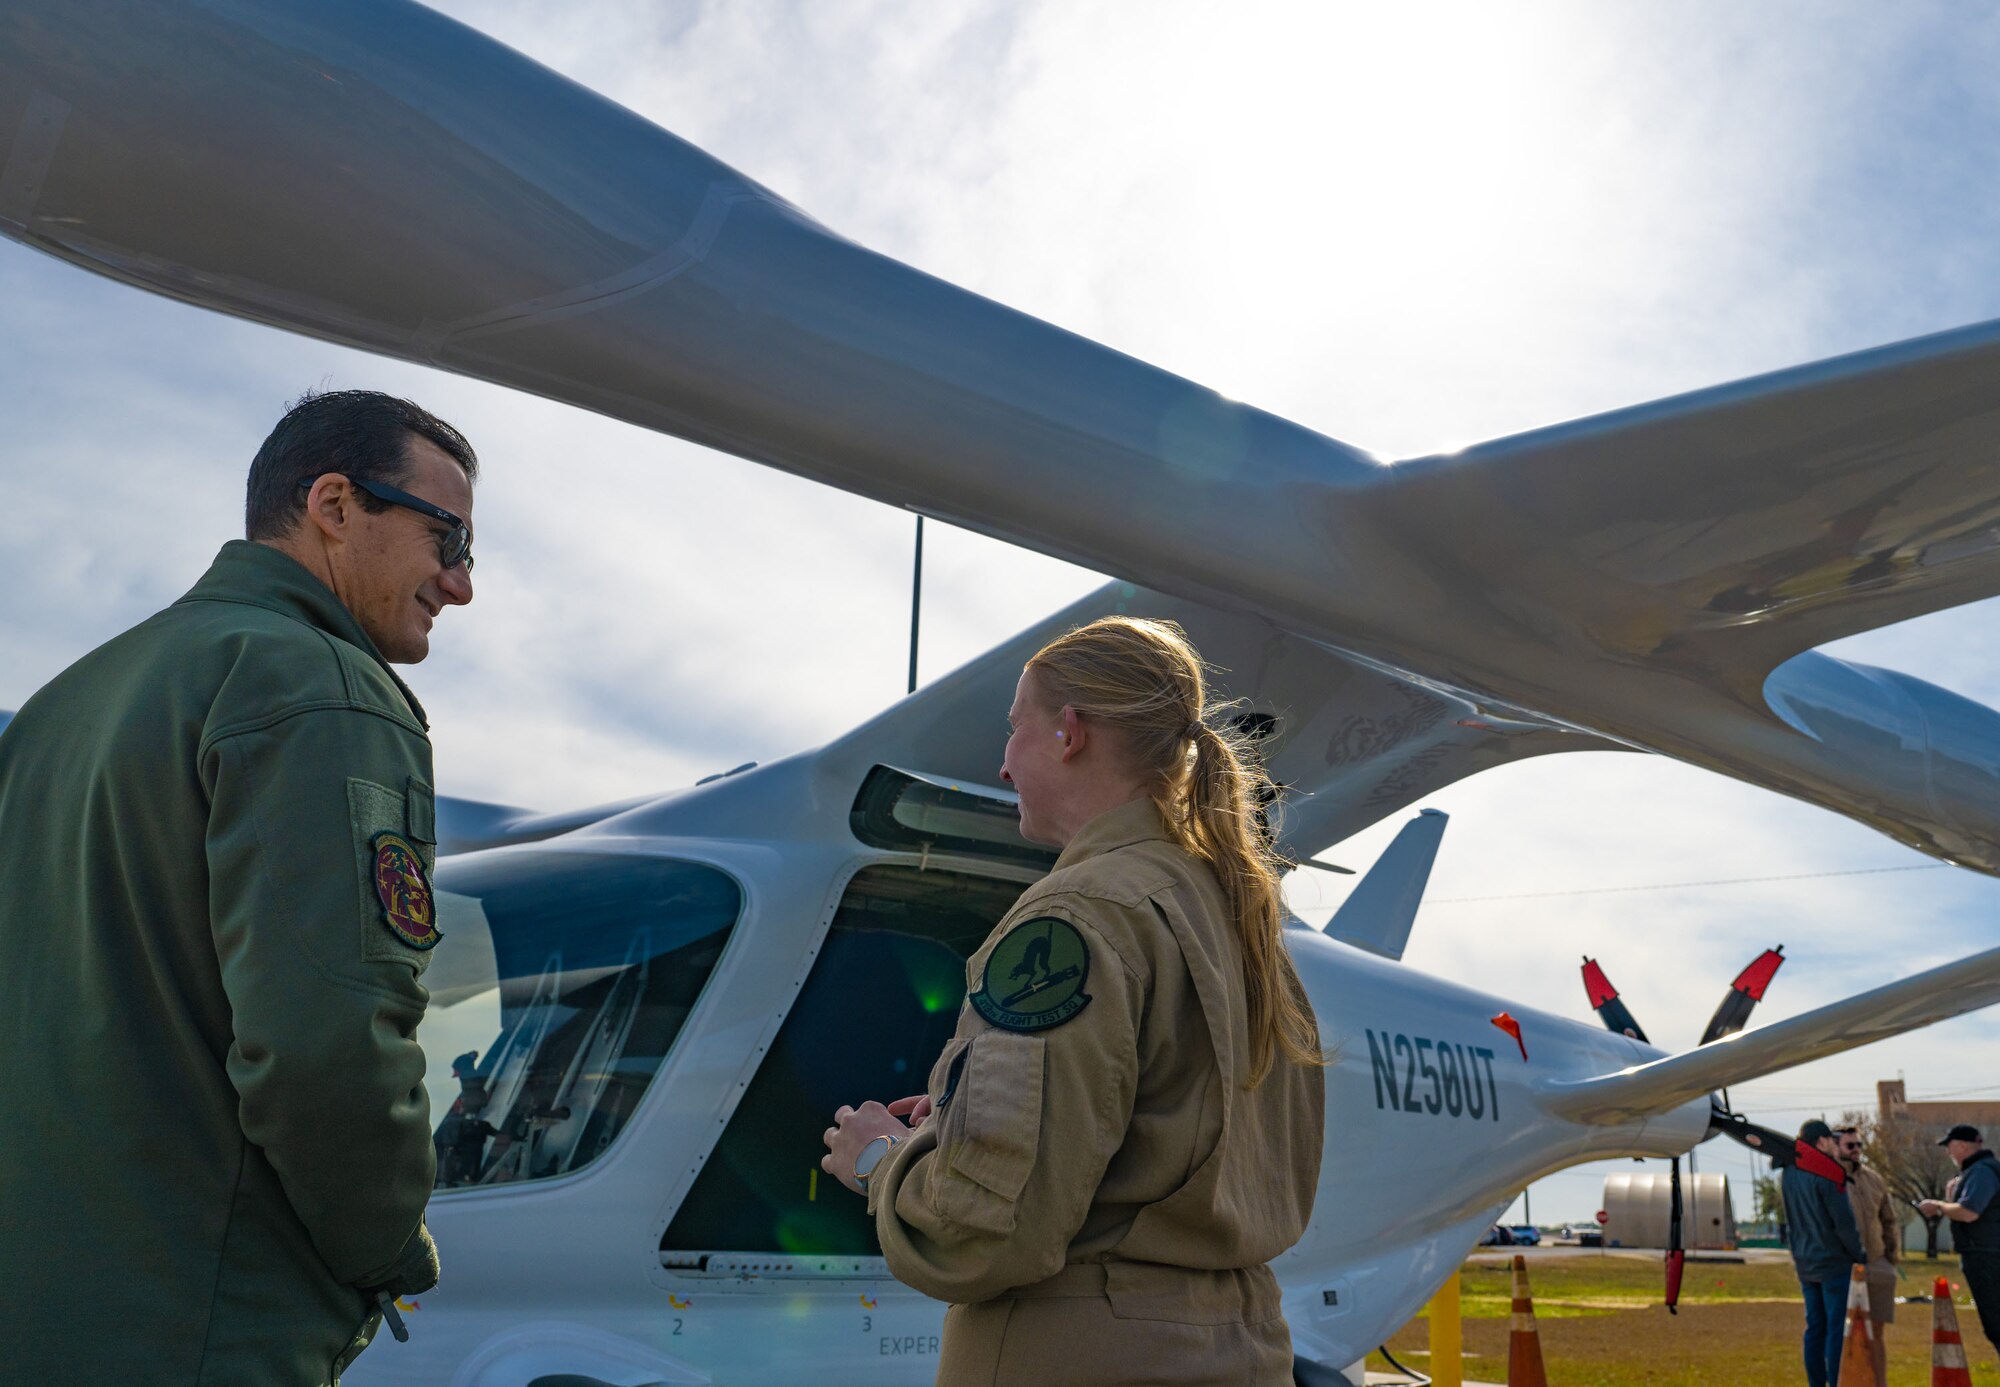 Two military members talk next to an electric aircraft.